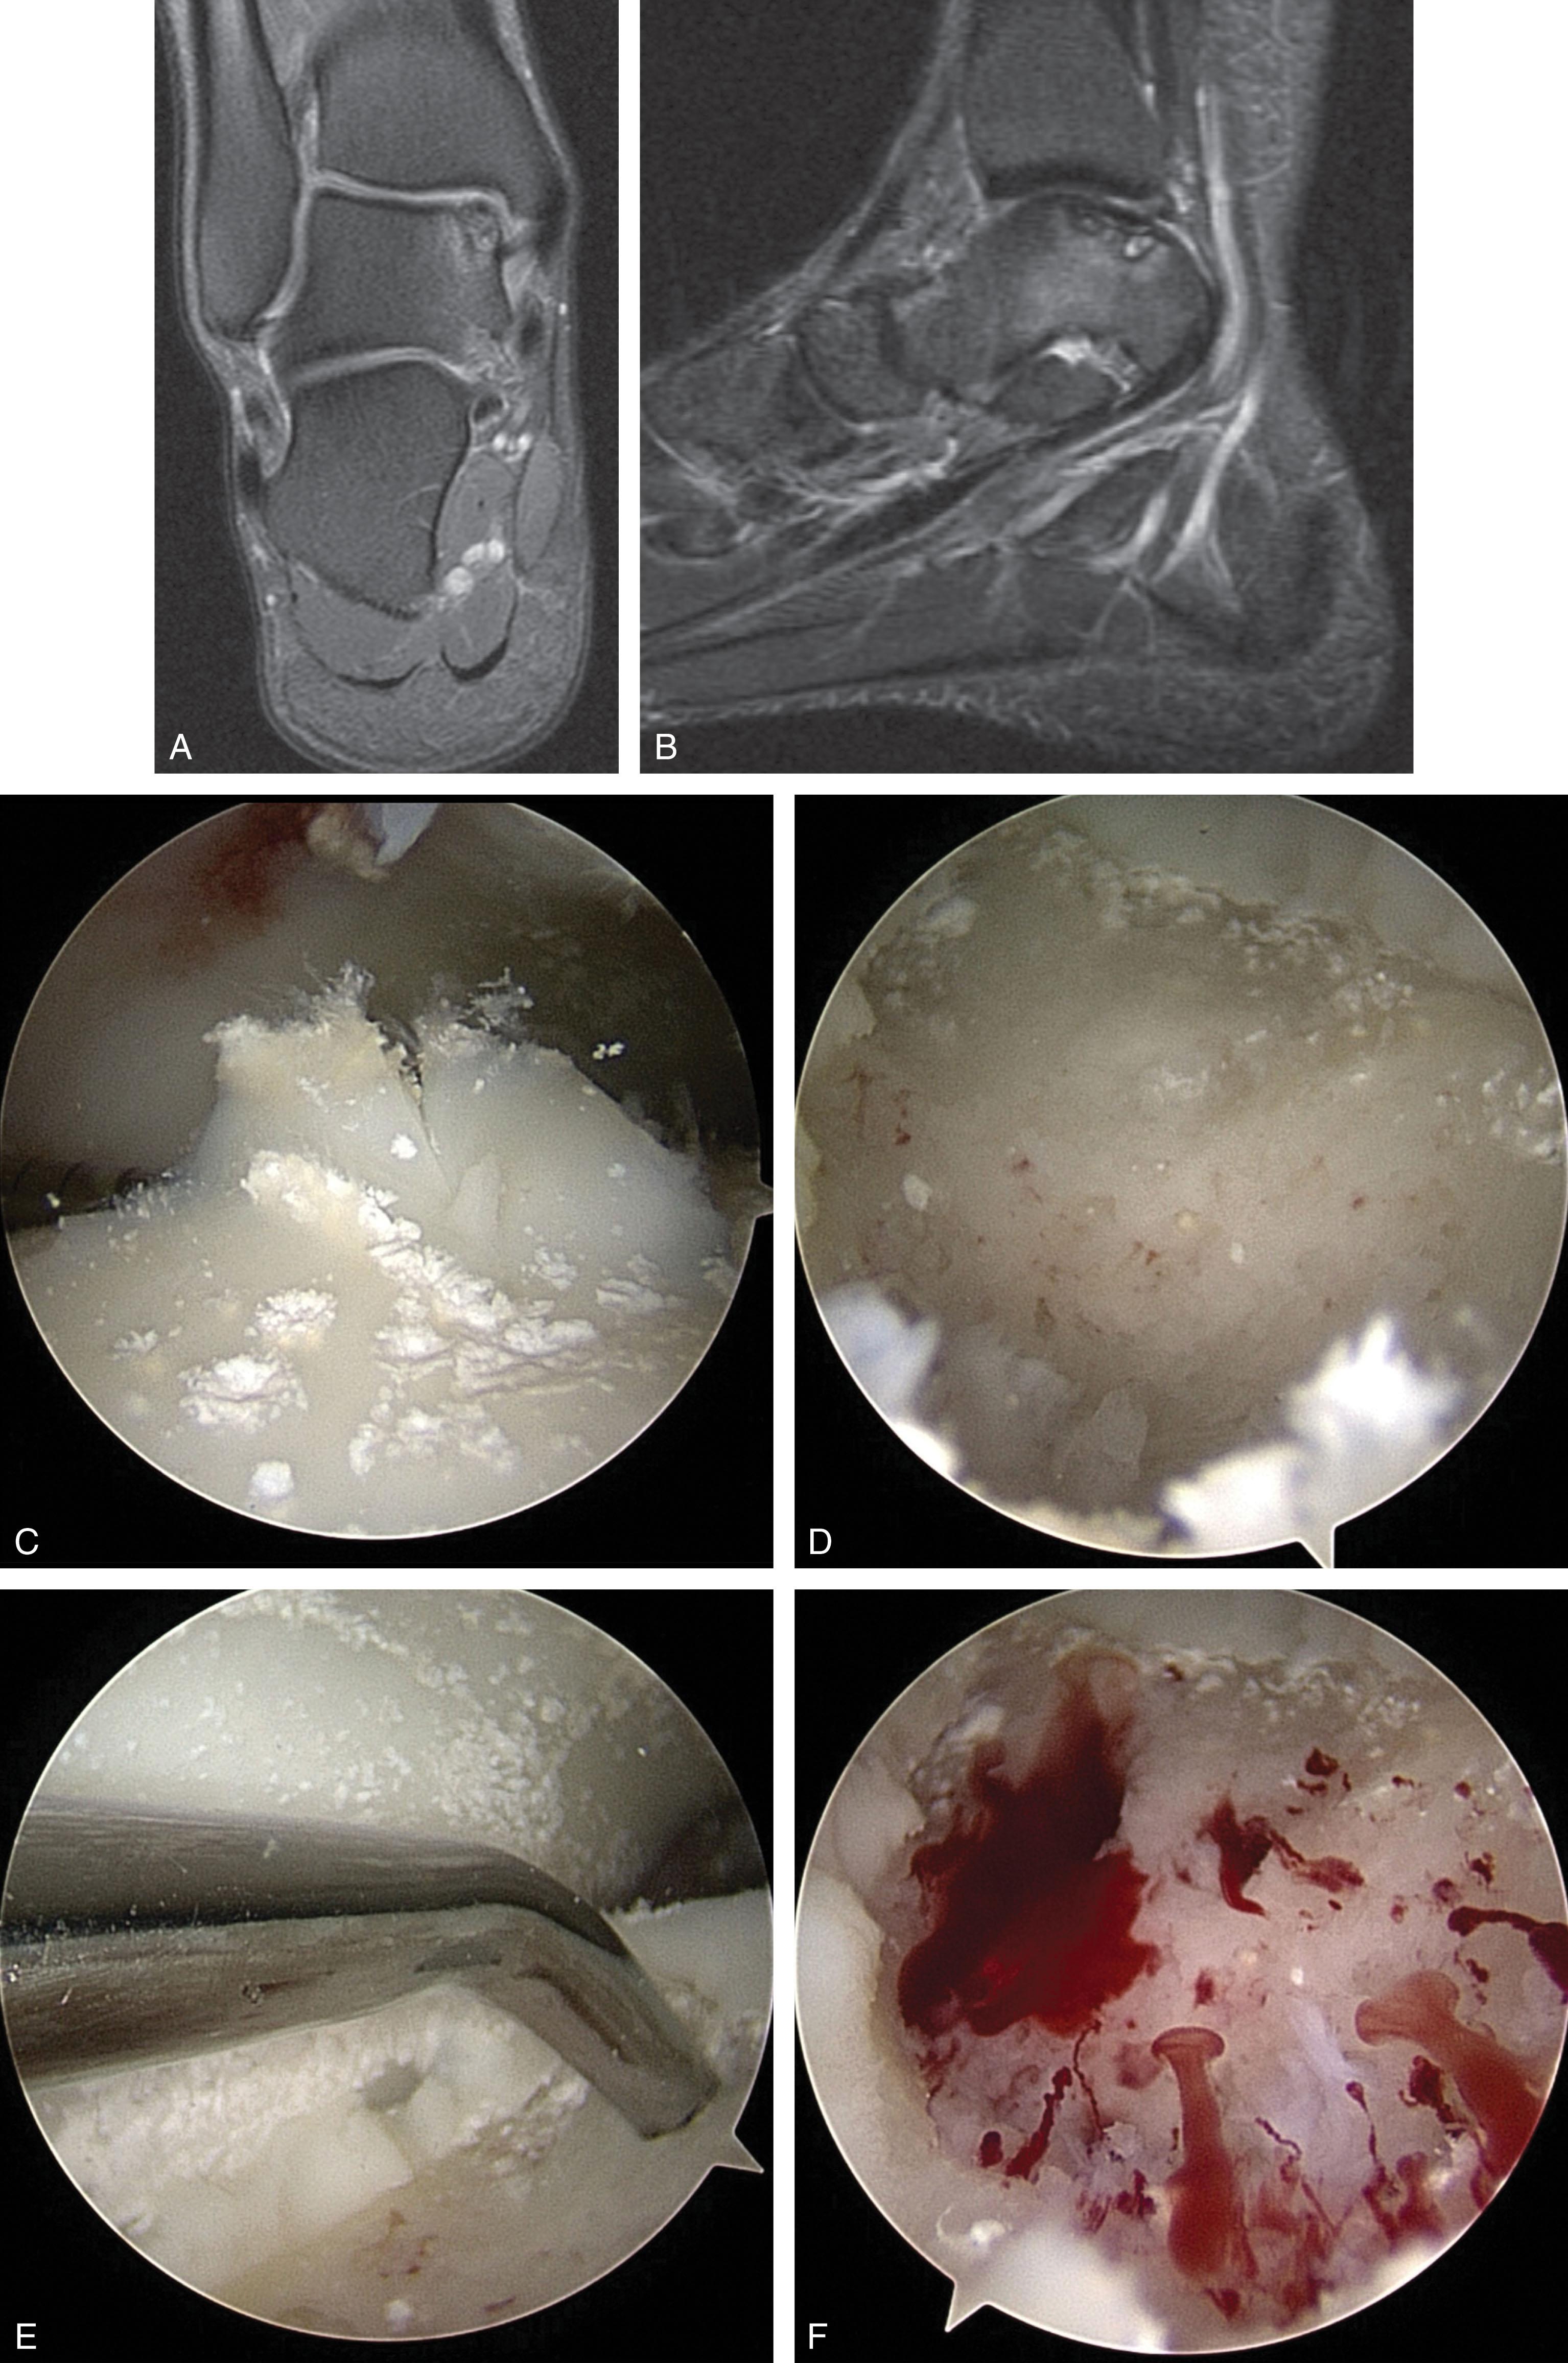 Fig. 40-14, Arthroscopic microfracture technique for osteochondral lesions of the talus. A and B , MRI scans showing a Hepple Stage IIB medial talar dome osteochondral lesion. C , Arthroscopic view of the medial talus through the anterolateral portal showing partial elevation of the talar dome cartilage surface with an intact base (Ferkel Grade D). D , Arthroscopic view after debridement. E , Microfracture awl shown penetrating the subchondral bone. F , Tourniquet and fluid pressure are reduced to visualize bleeding from the subchondral bone through the microfracture holes.